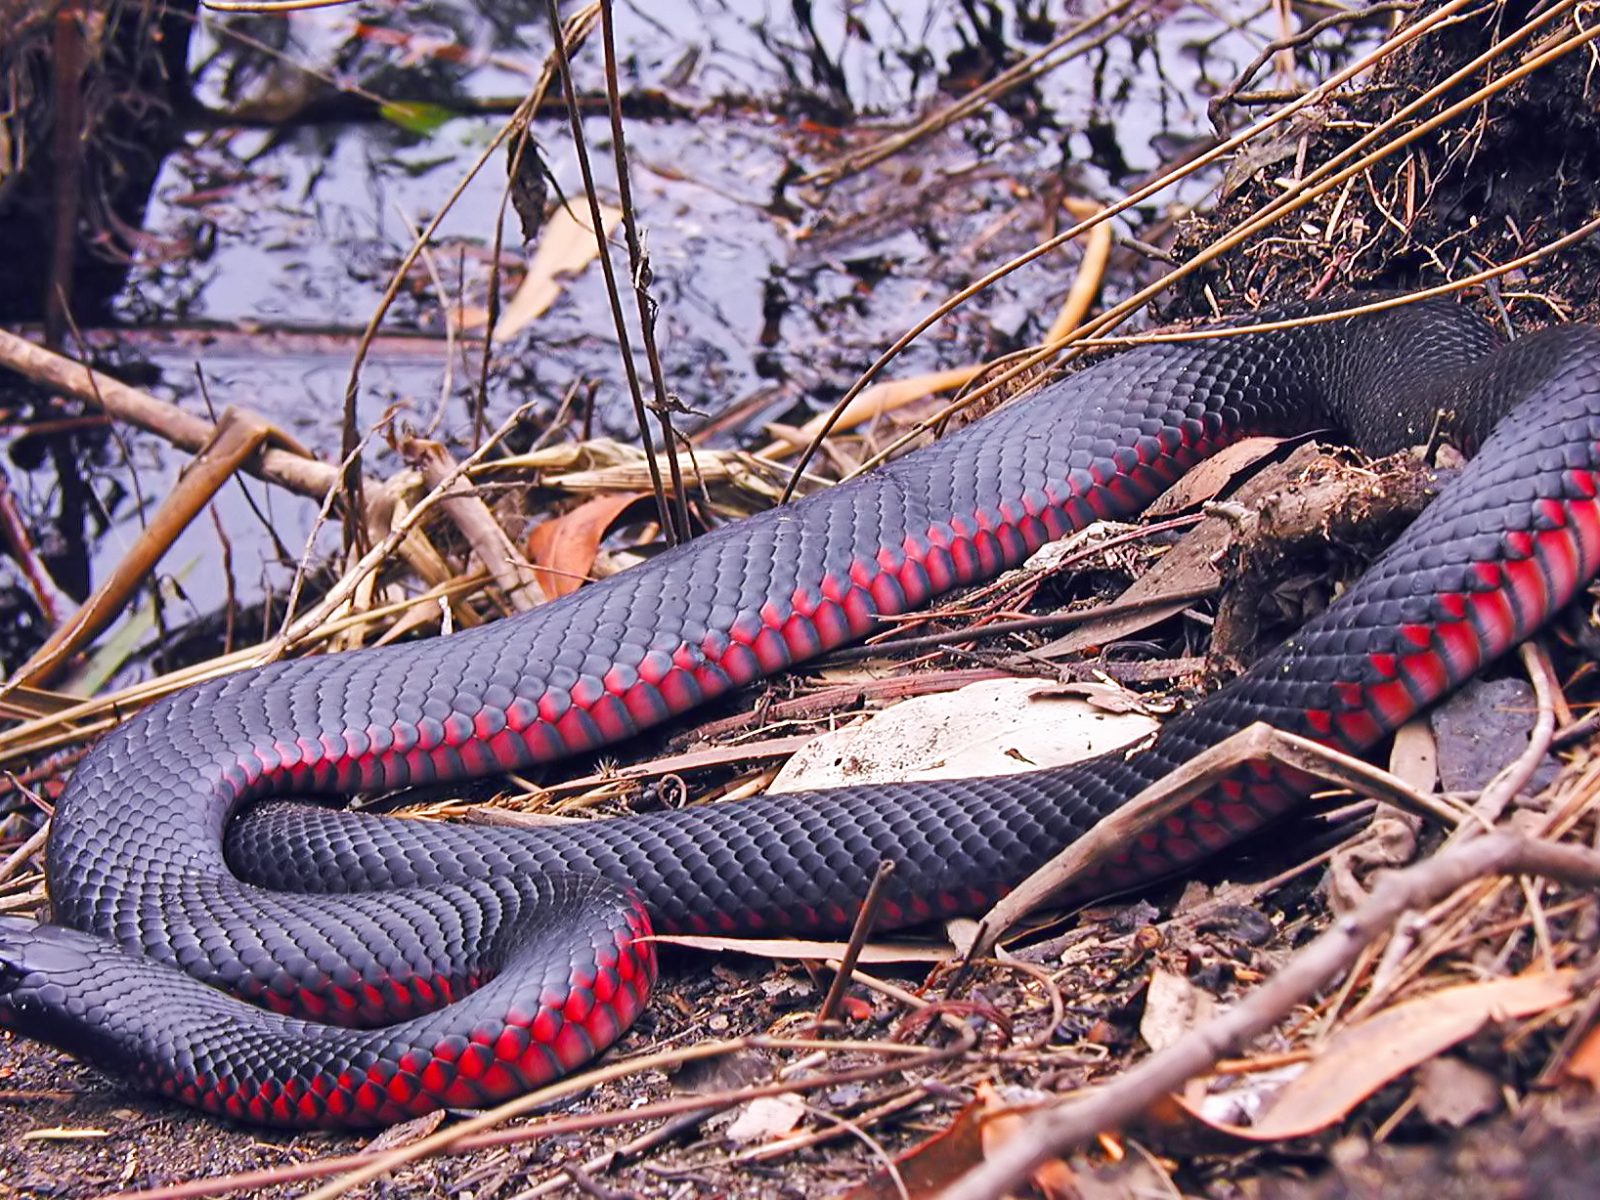 Leeches, ticks, snakes and spiders | Blog - NSW National Parks